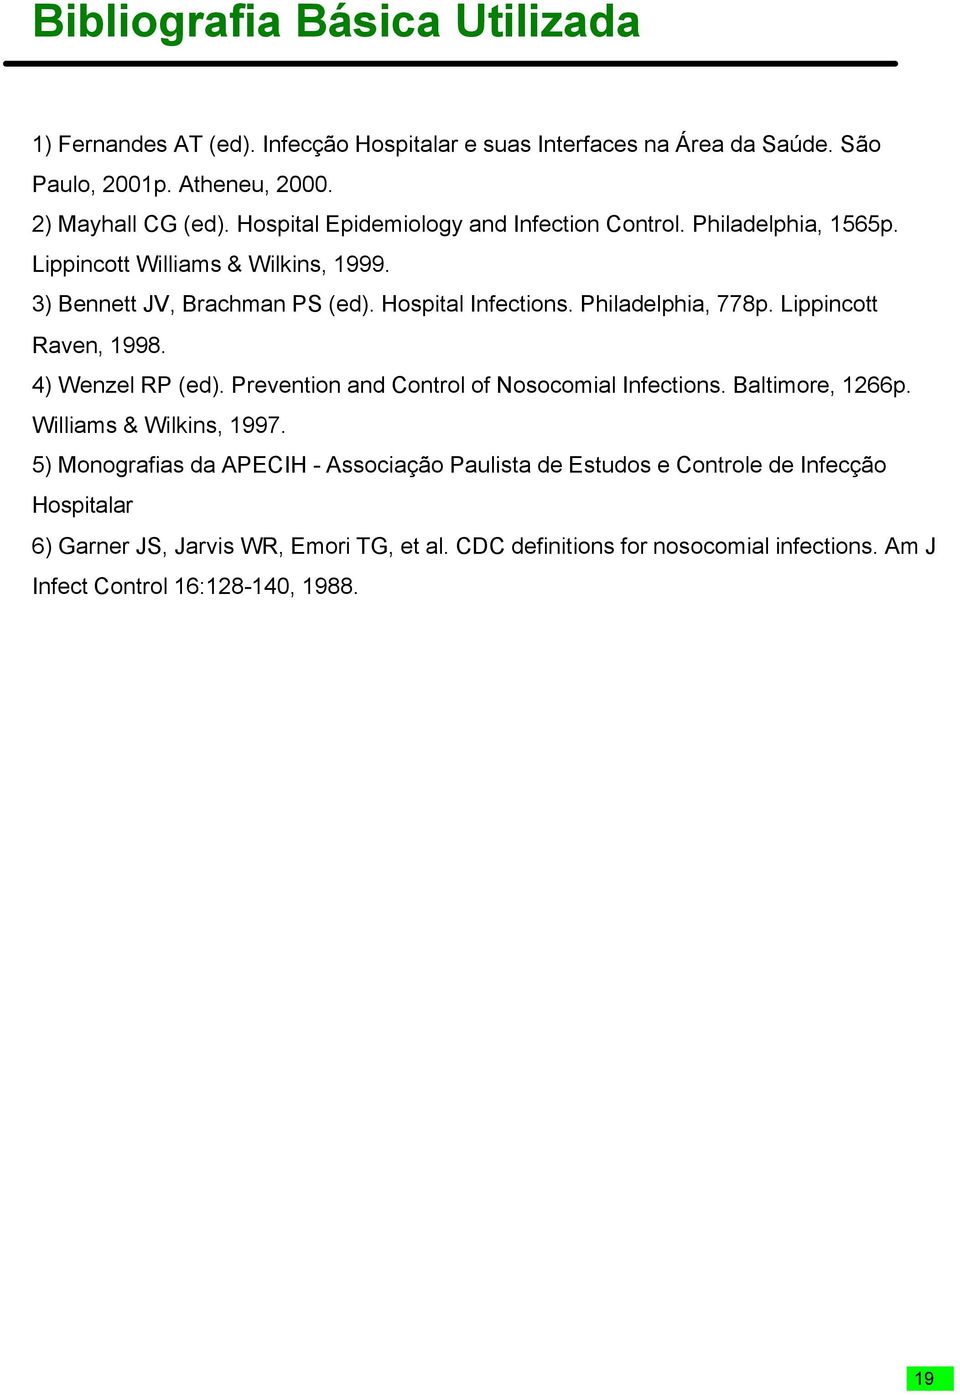 Philadelphia, 778p. Lippincott Raven, 1998. 4) Wenzel RP (ed). Prevention and Control of Nosocomial Infections. Baltimore, 1266p. Williams & Wilkins, 1997.